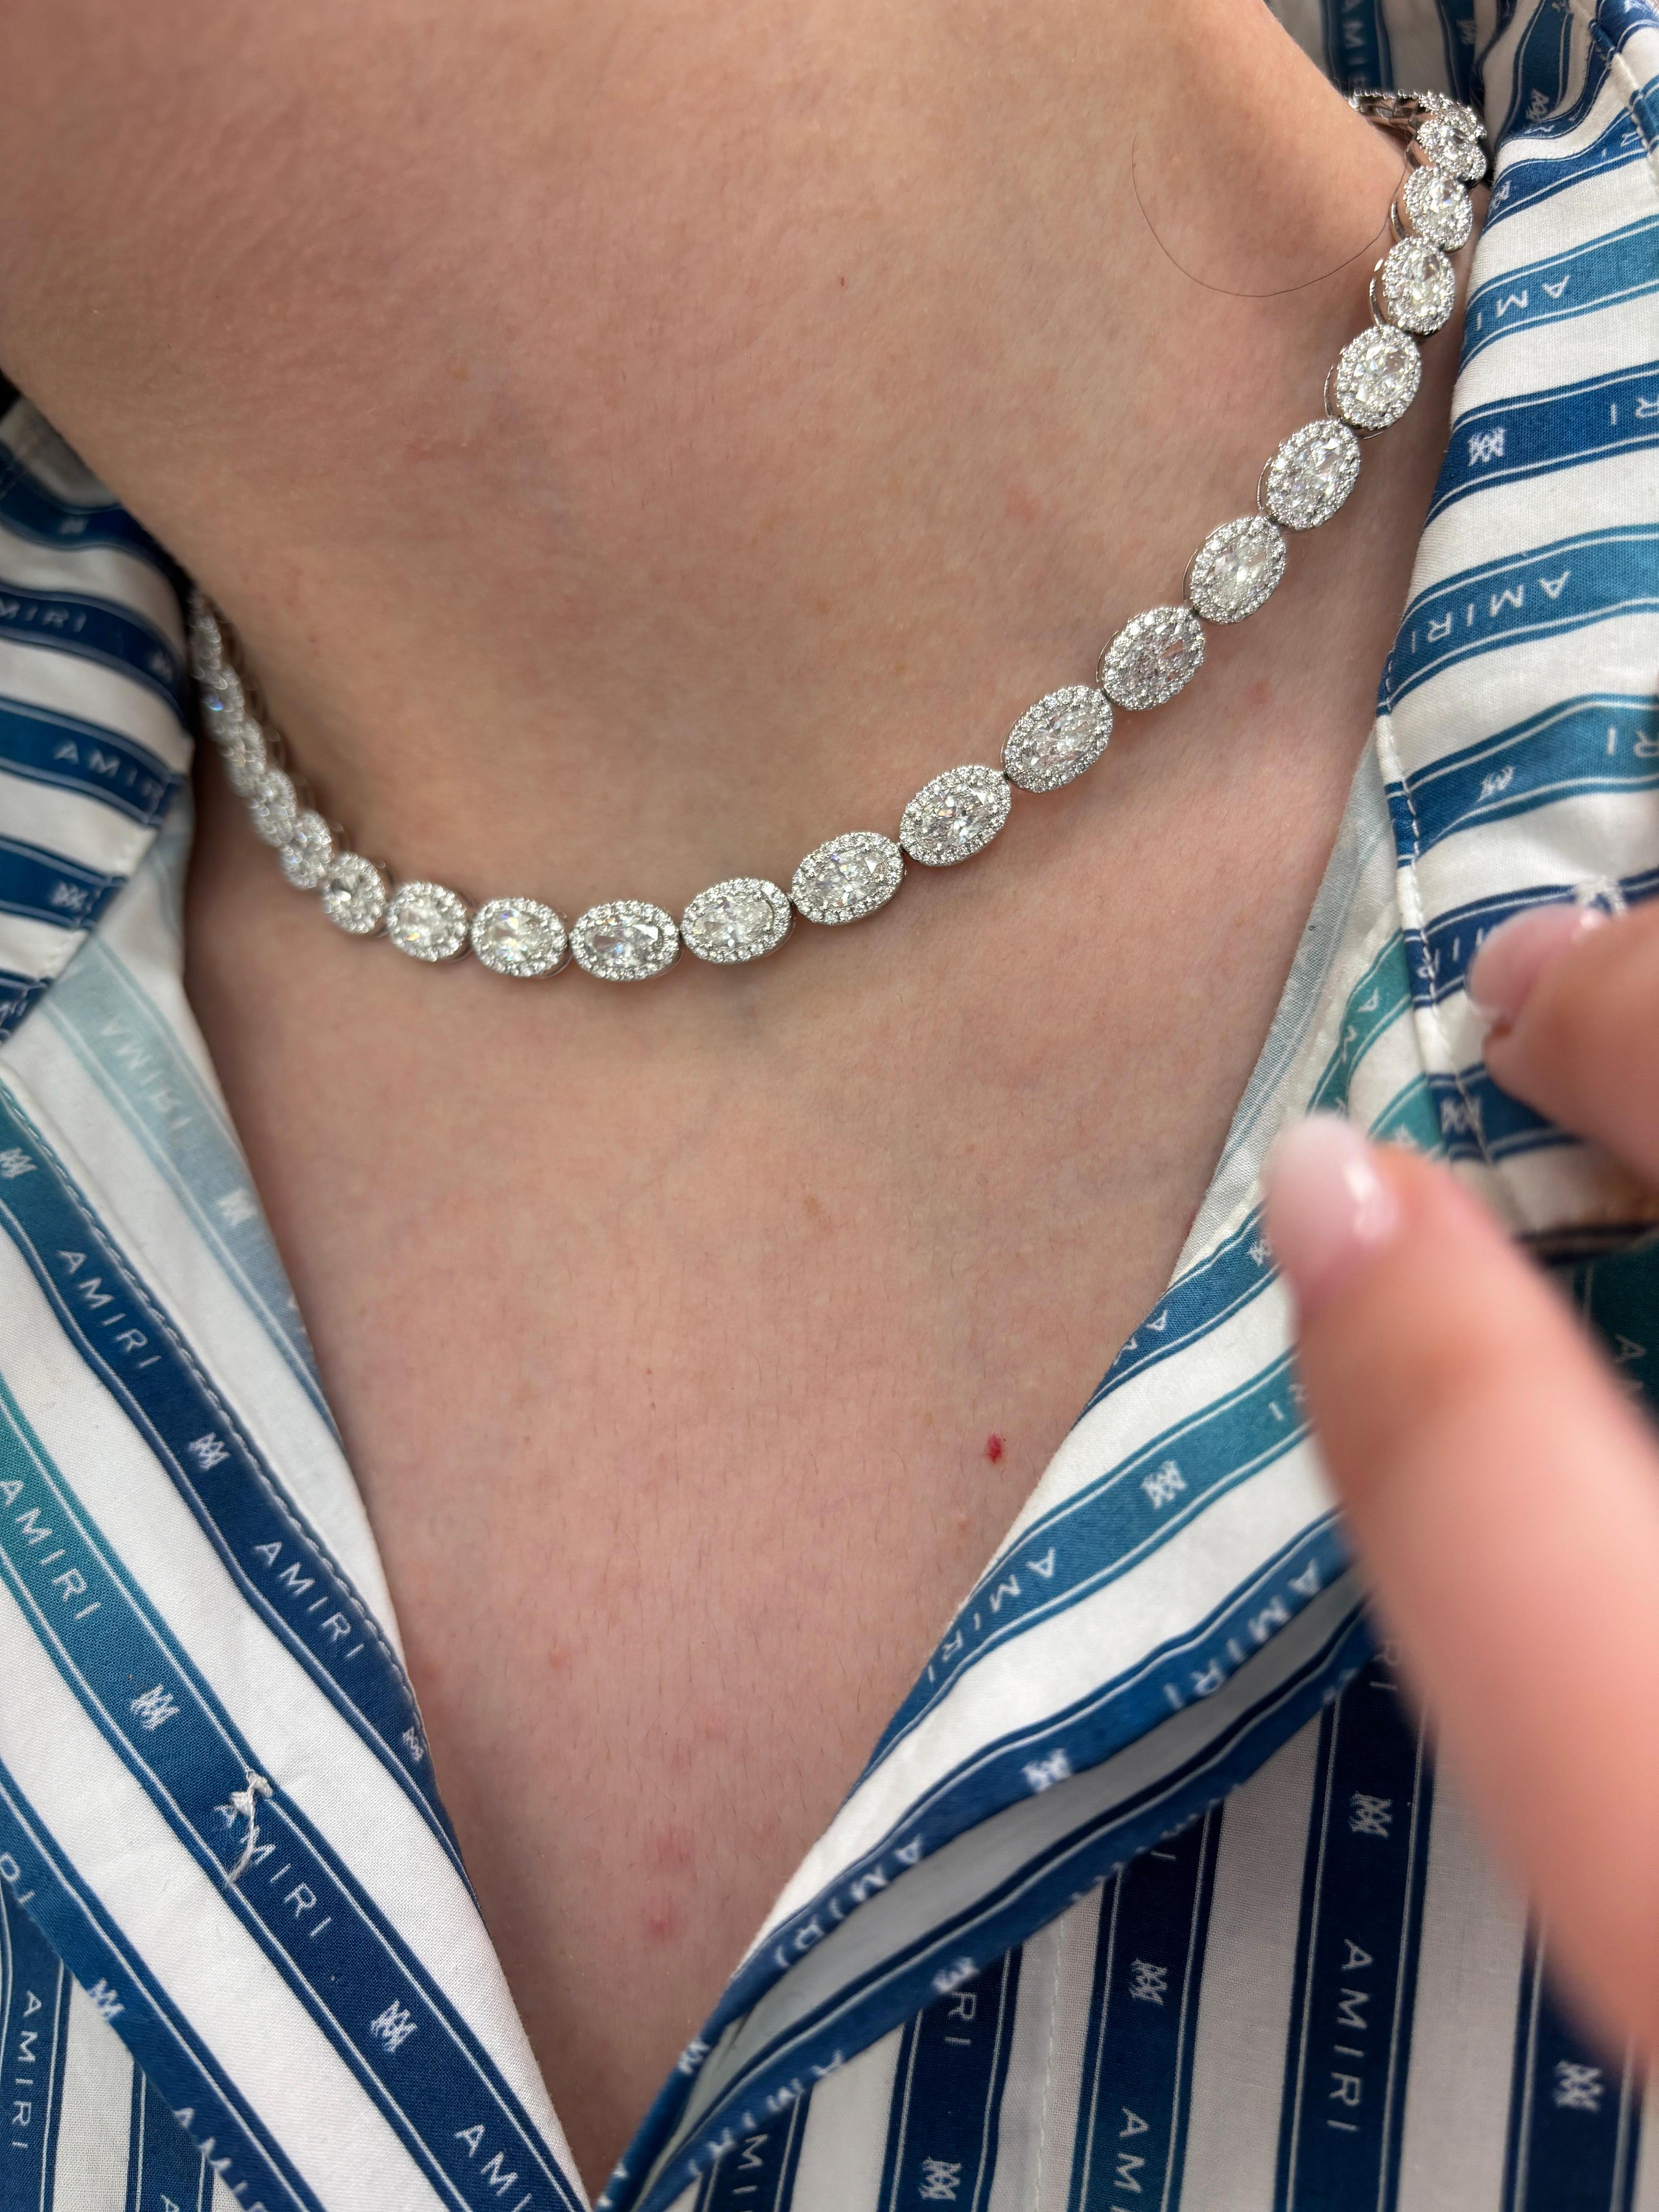 Stunning  oval diamond tennis necklace east-west. High jewelry by Alexander Beverly Hills.
22.18 carats total diamond weight.
45 oval diamonds, 18.55 carats total. Approximately F/G color and SI1 clarity. Complimented with 730 round brilliant